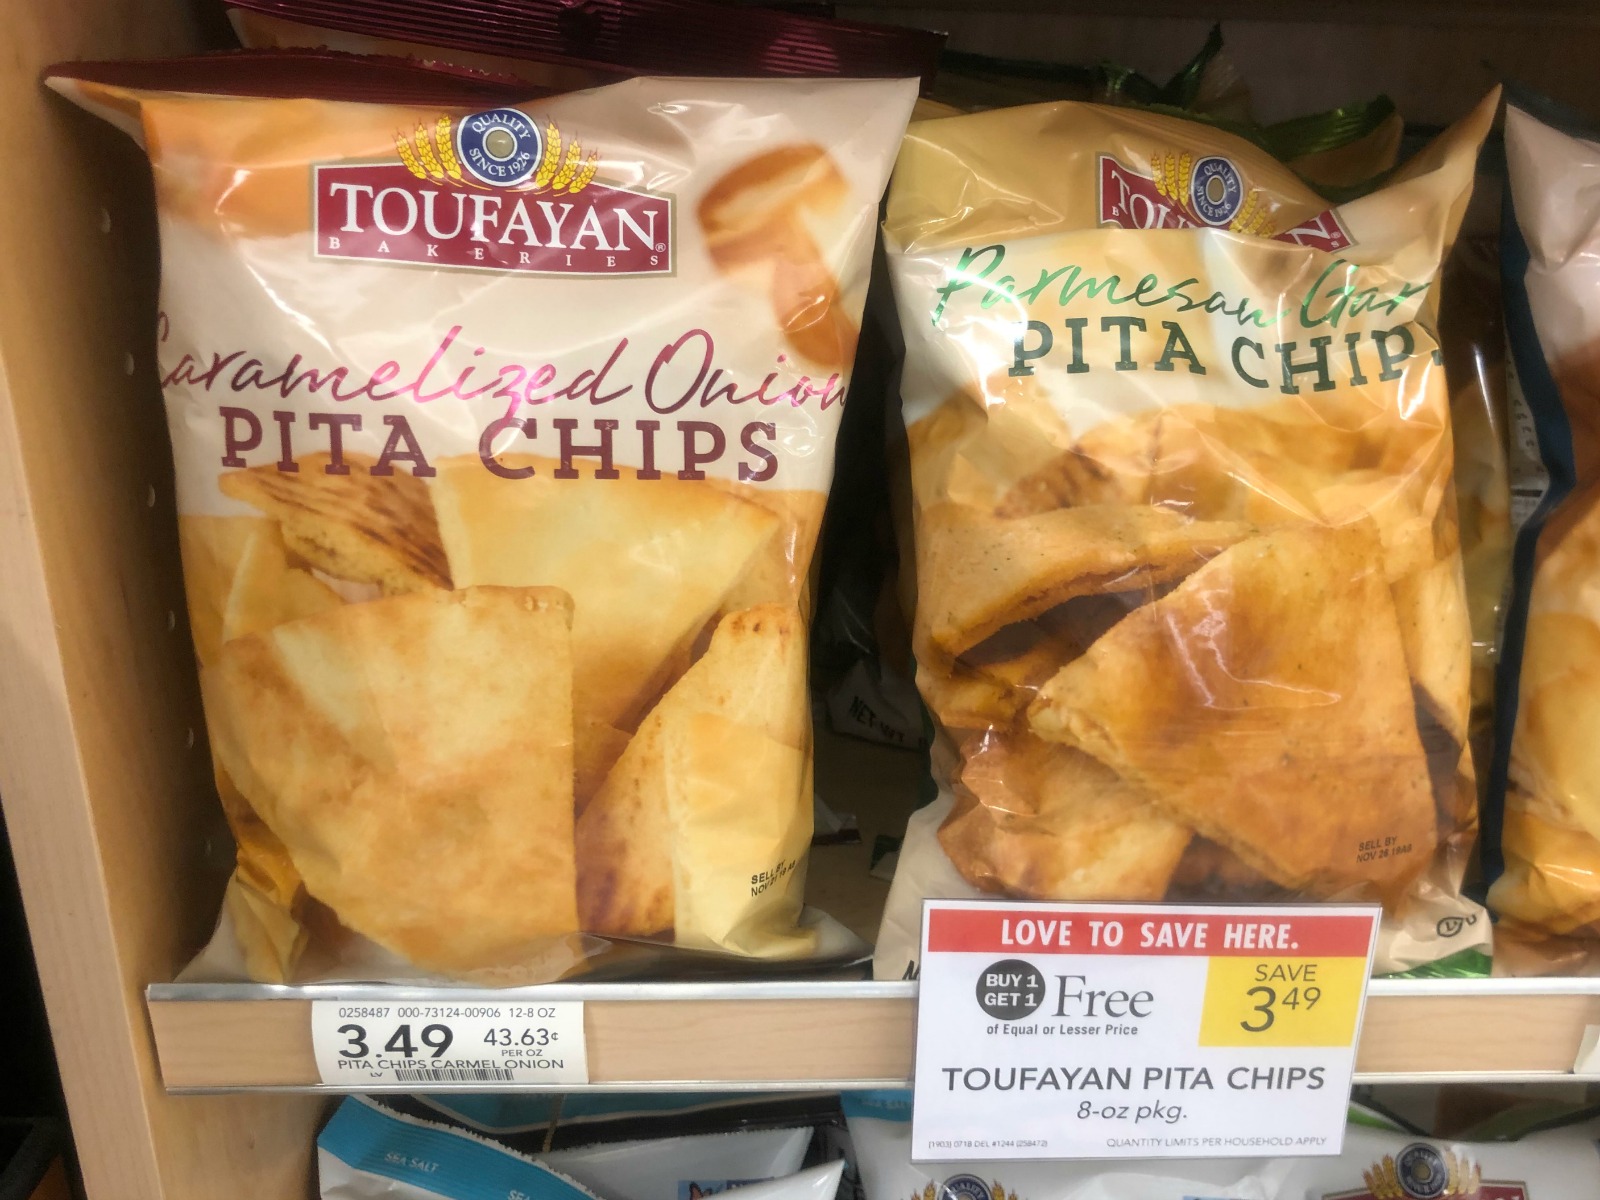 Toufayan Pita Chips Are Buy One, Get One FREE This Week At Publix! on I Heart Publix 1